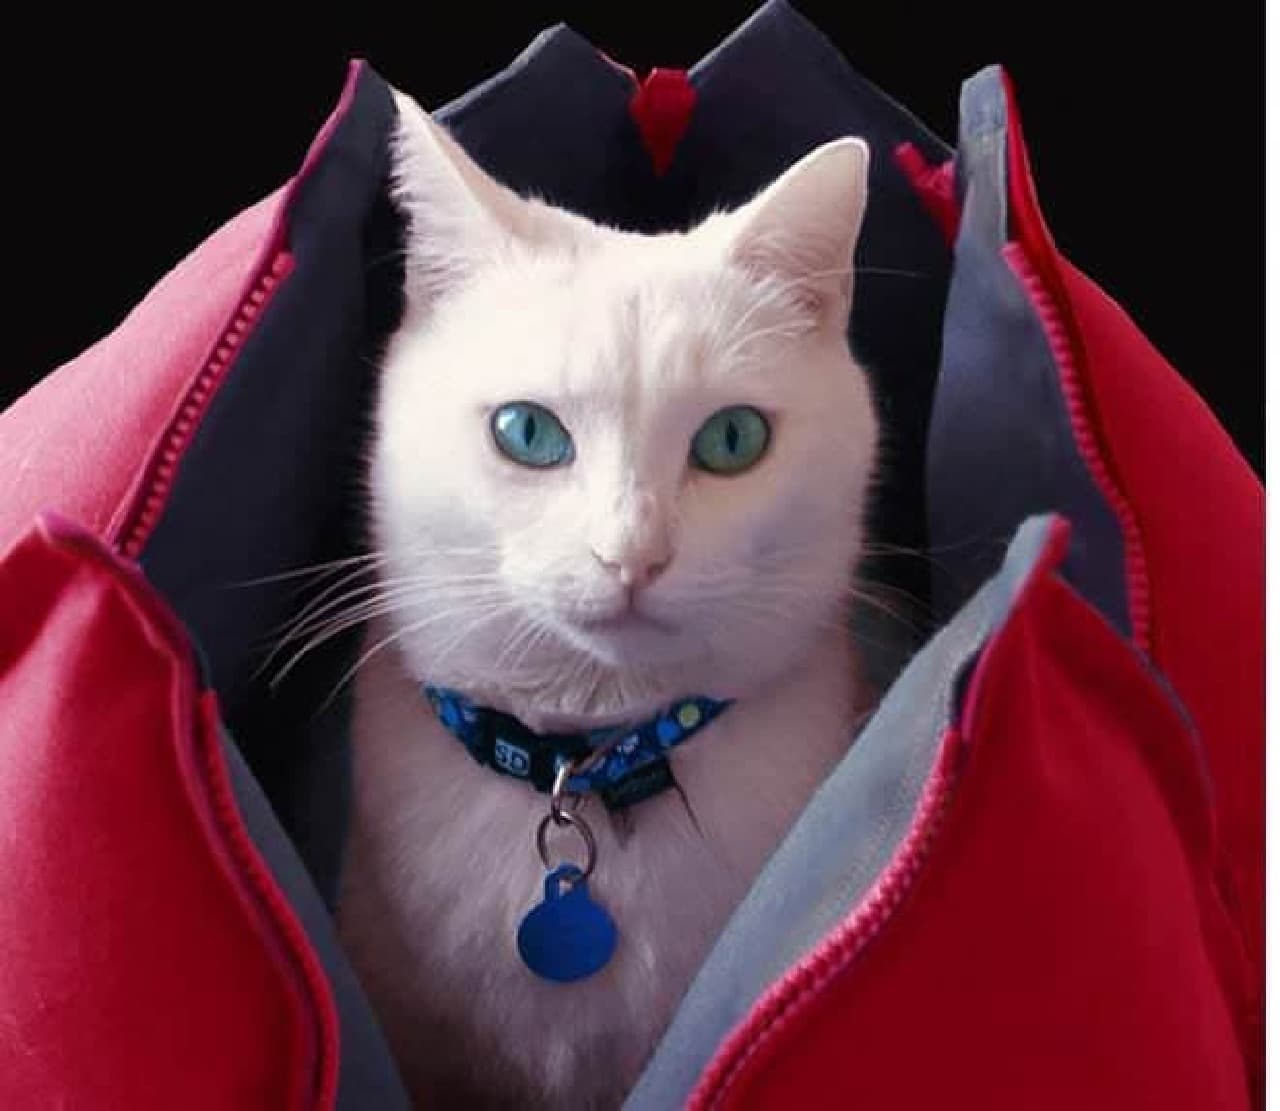 Fashionable cat bed "Nerumbo" that can be washed and carried